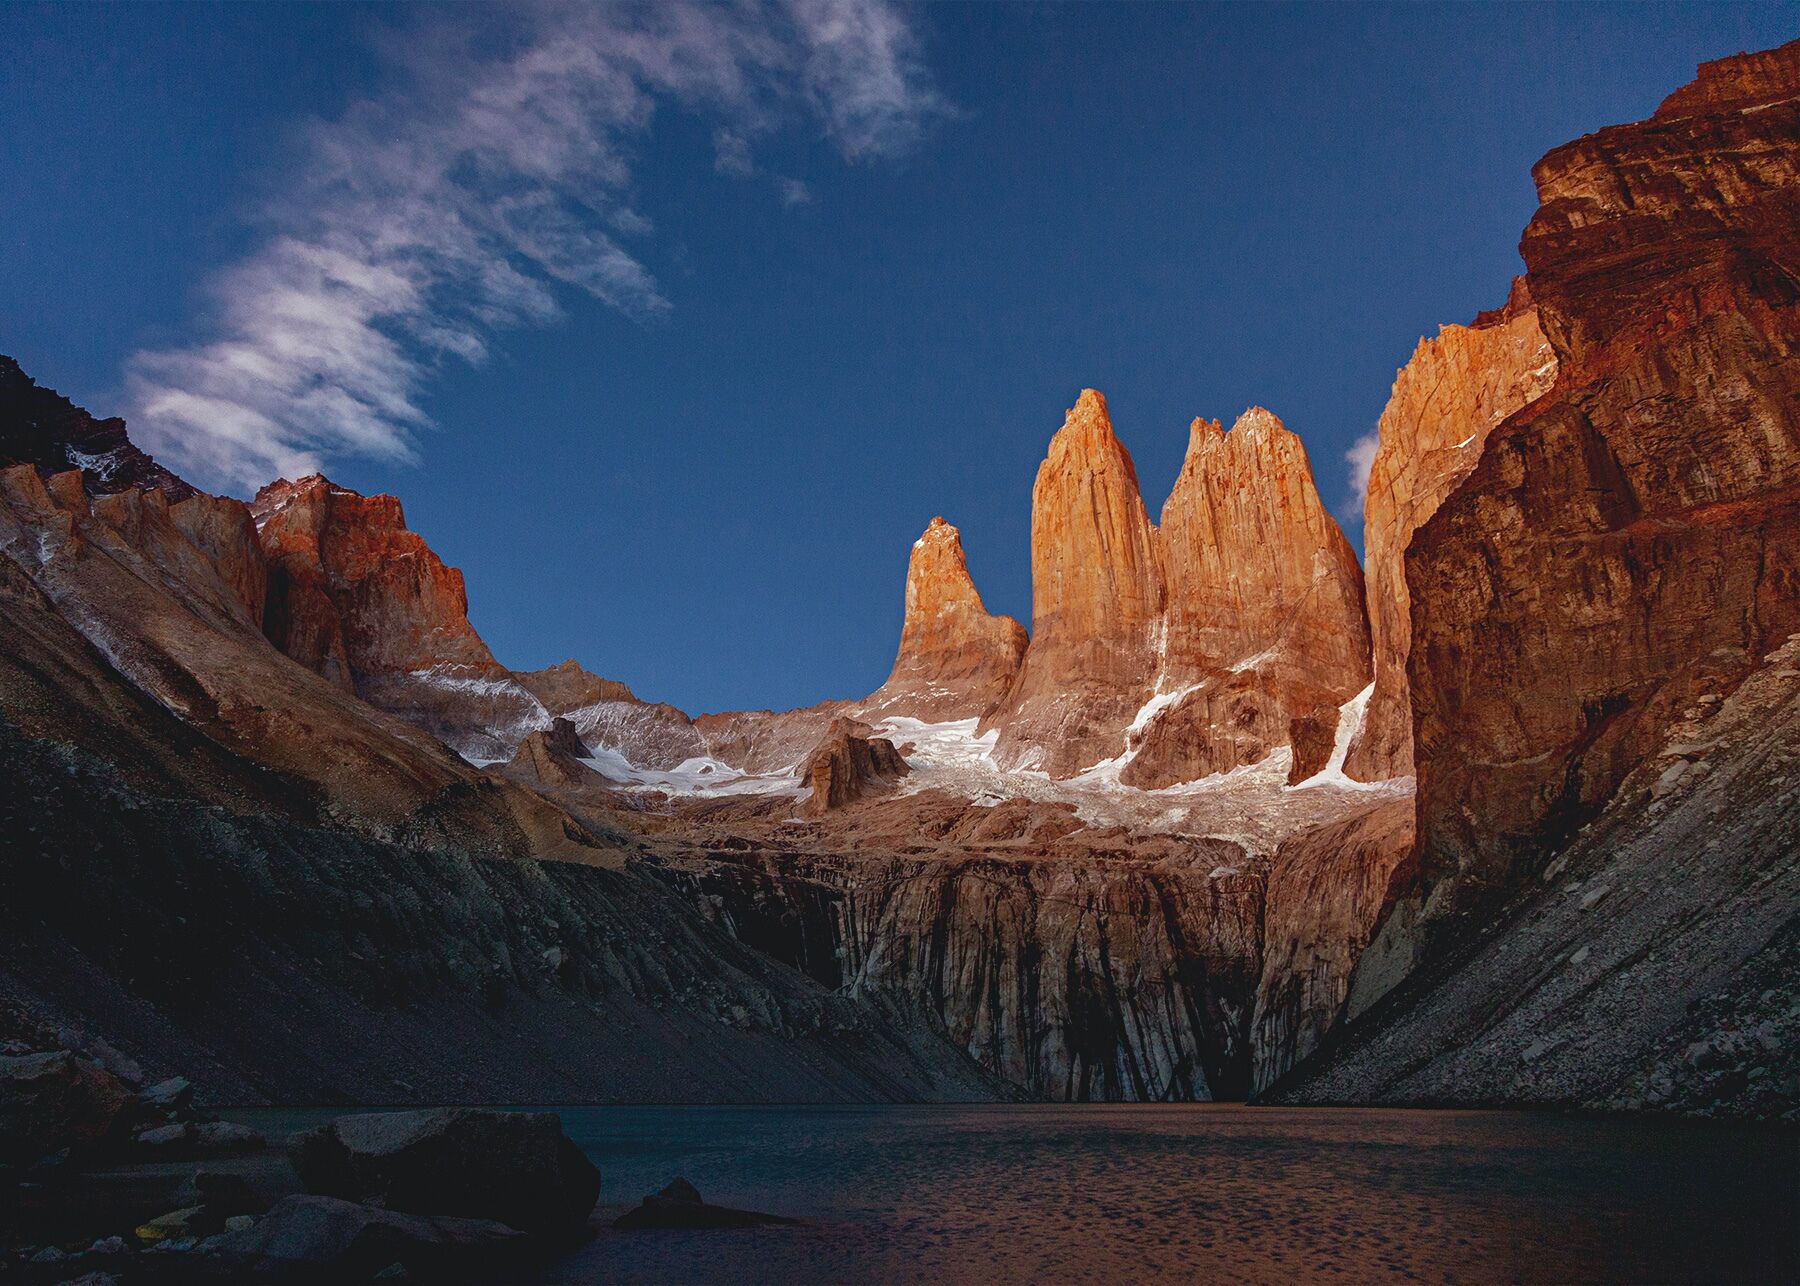 The towers of Torres Del Paine National Park in Chilean Patagonia at sunrise